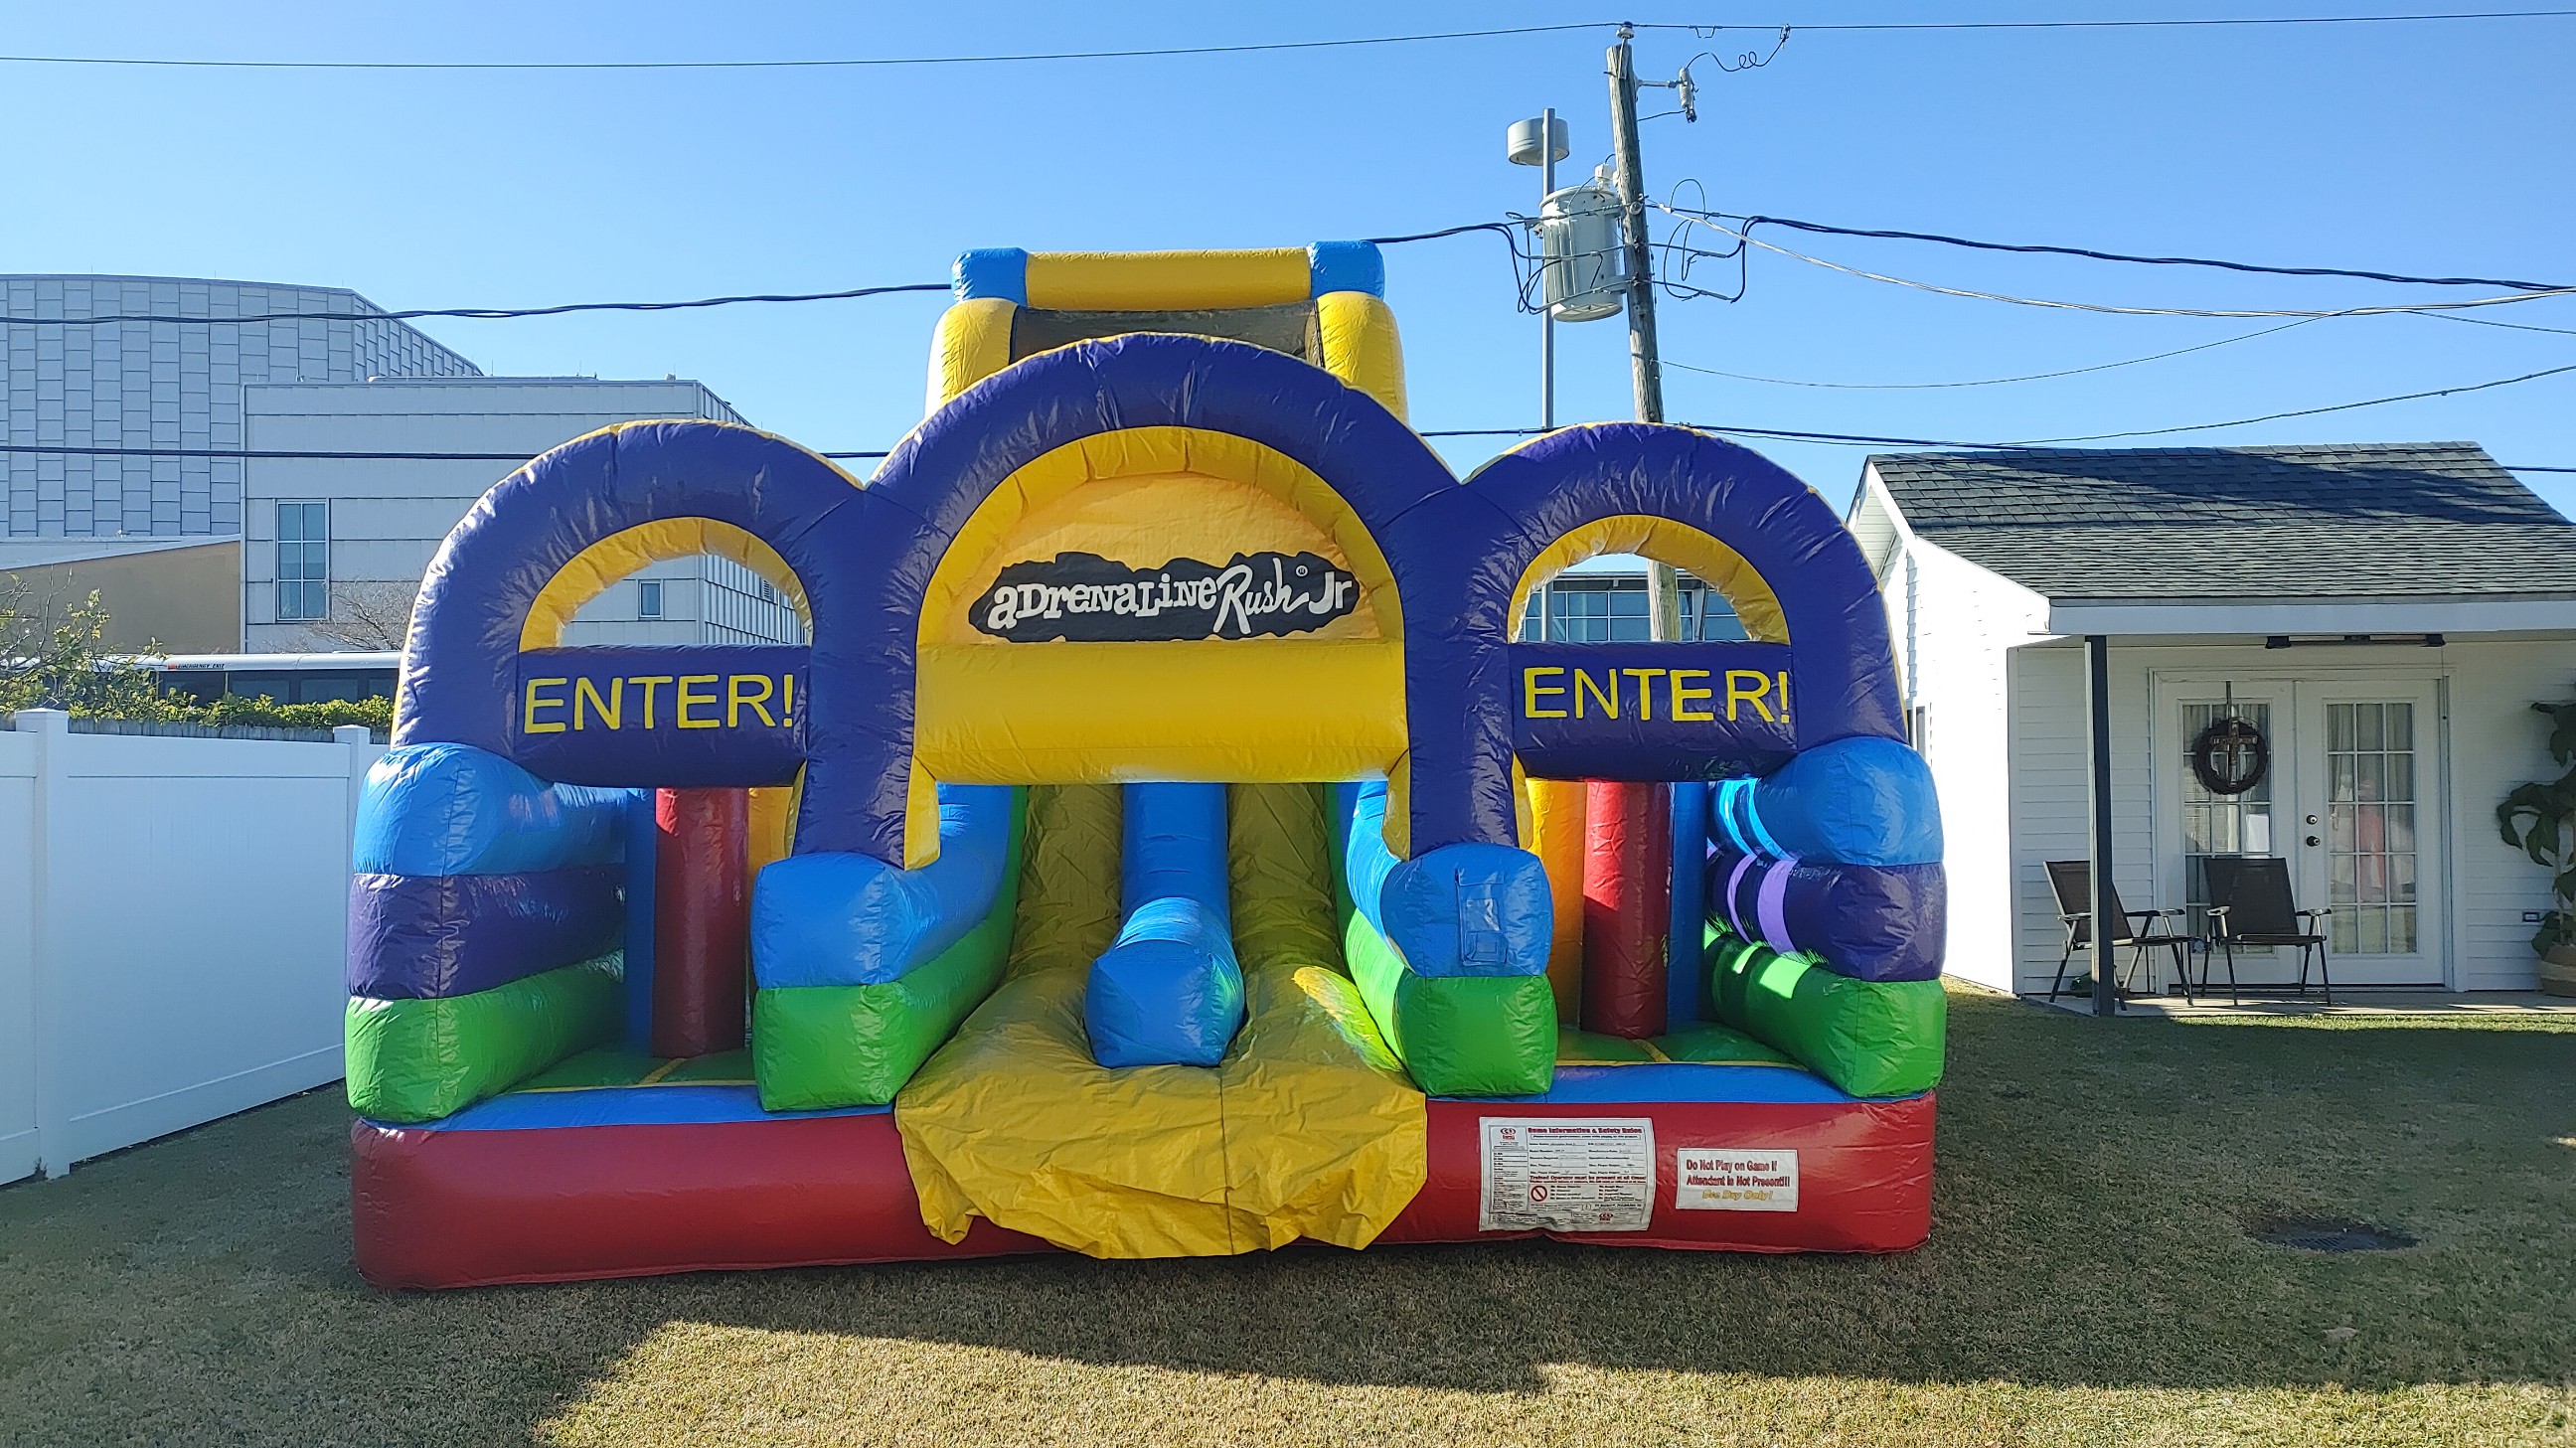 Adrenaline rush jr. obstacle course rental